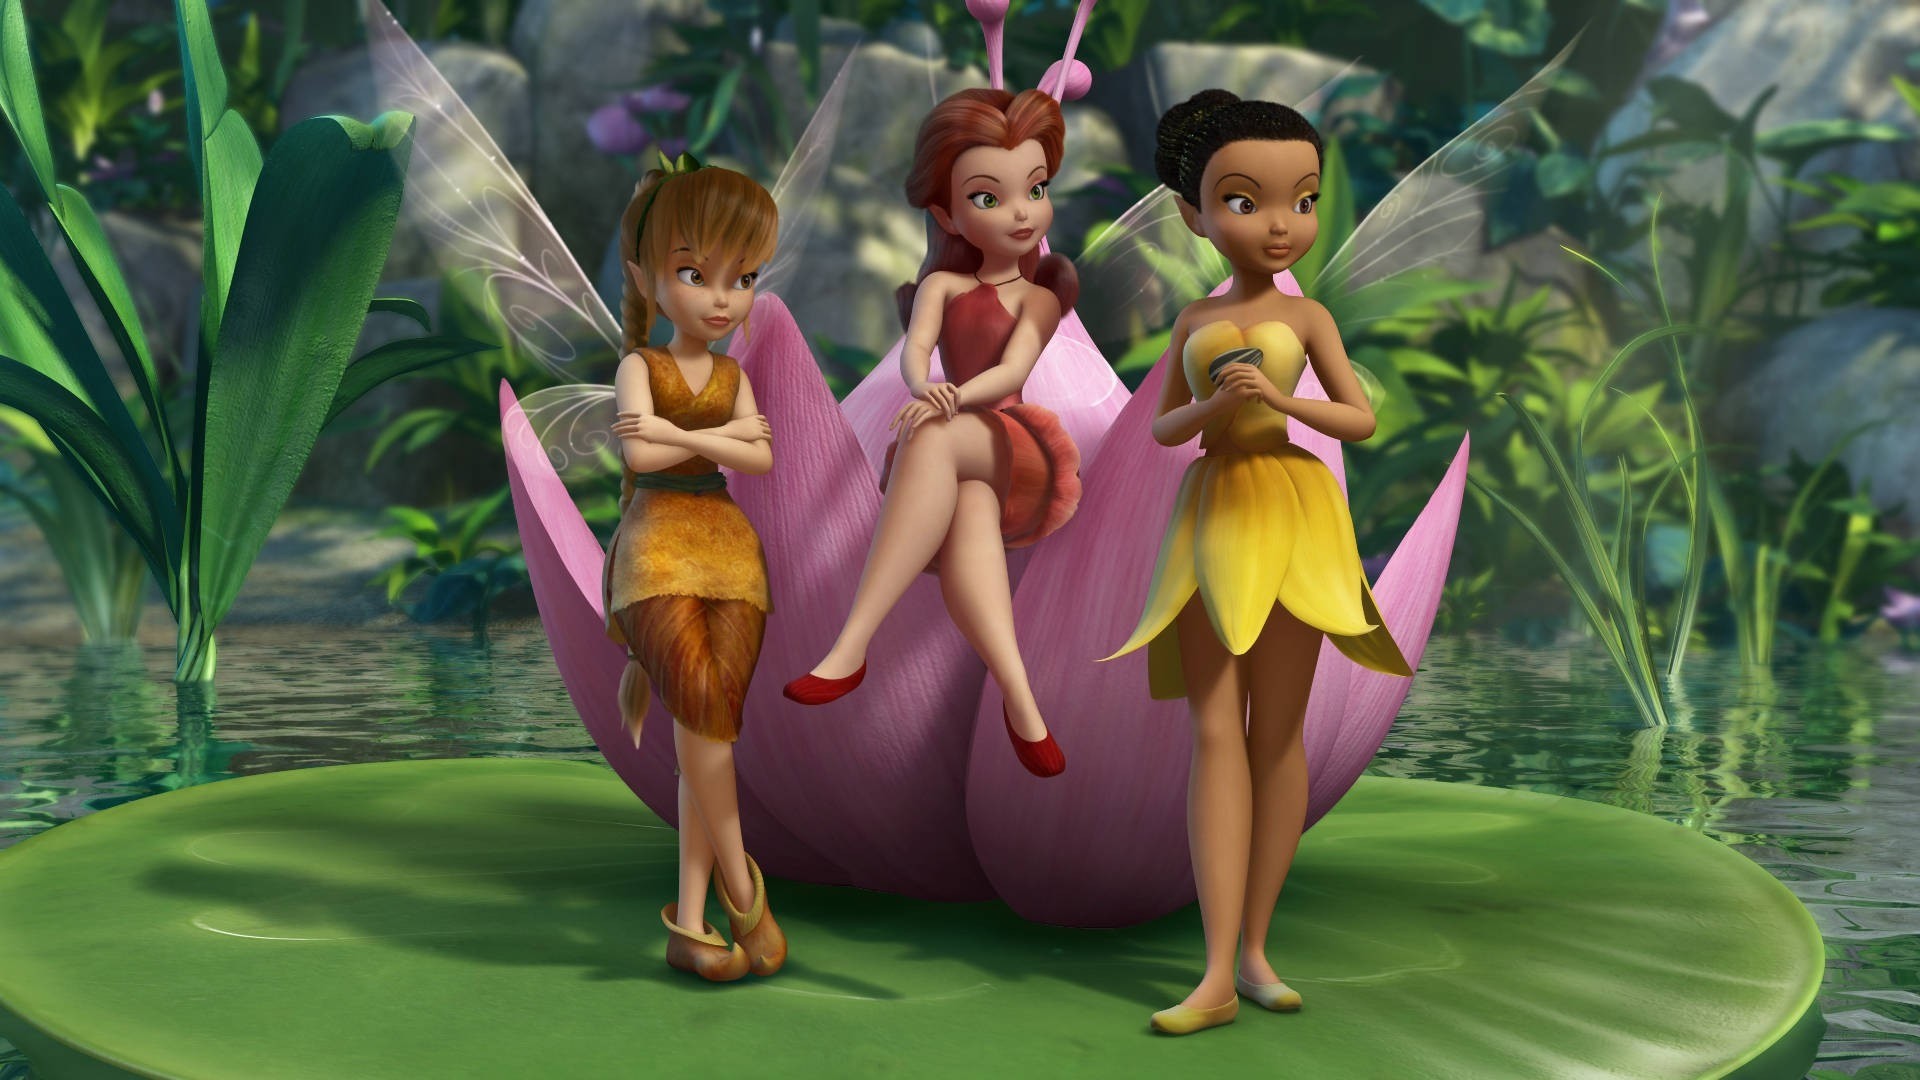 1920x1080 Tinkerbell Wallpapers Tinkerbell Full High Resolution Quality